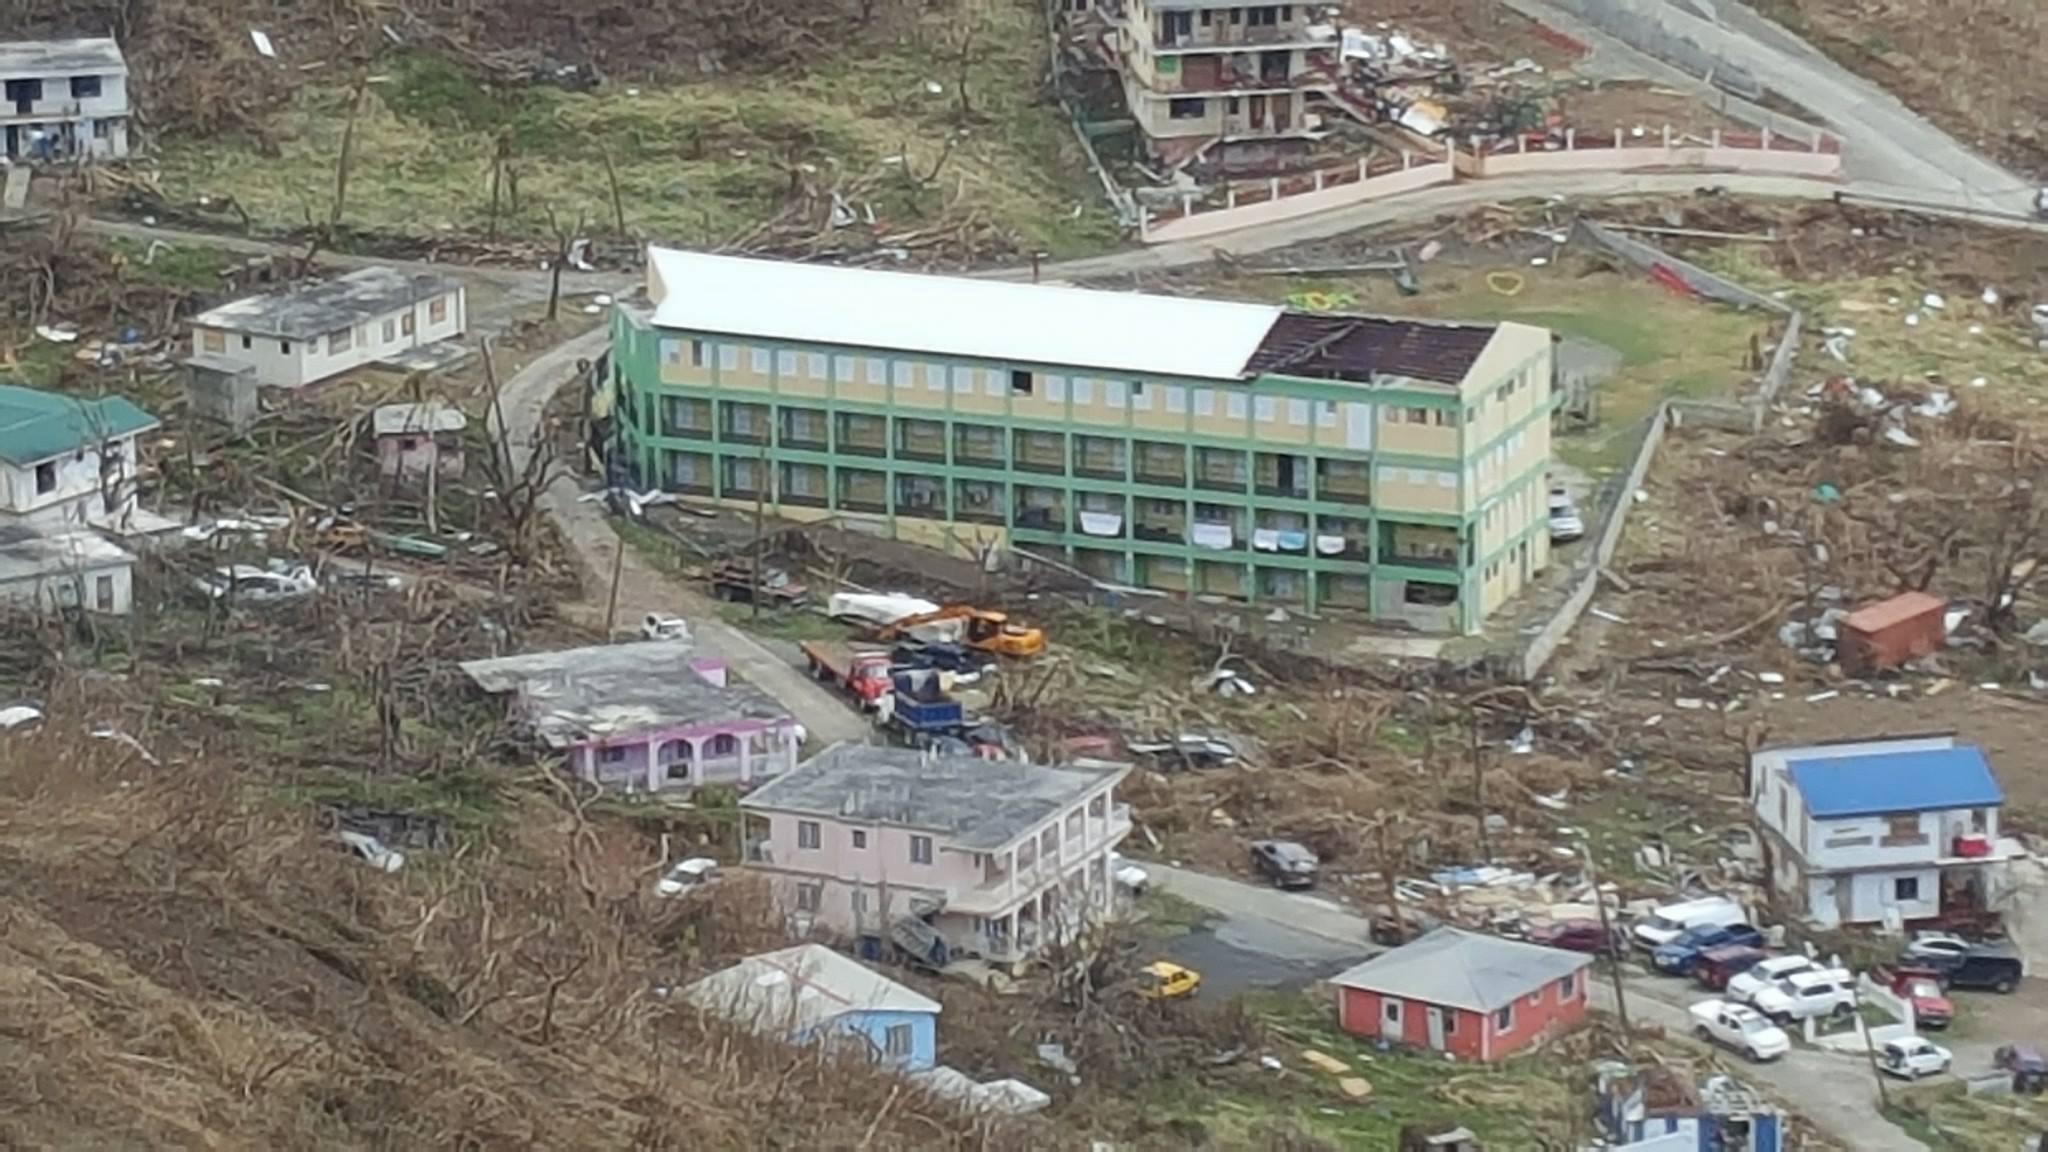 The British Virgin Islands Seventh-day Adventist School in Tortola sustained extensive damage to its campus. The school will be closed indefinitely. [Photo: BVI SDA School’s Facebook Page]